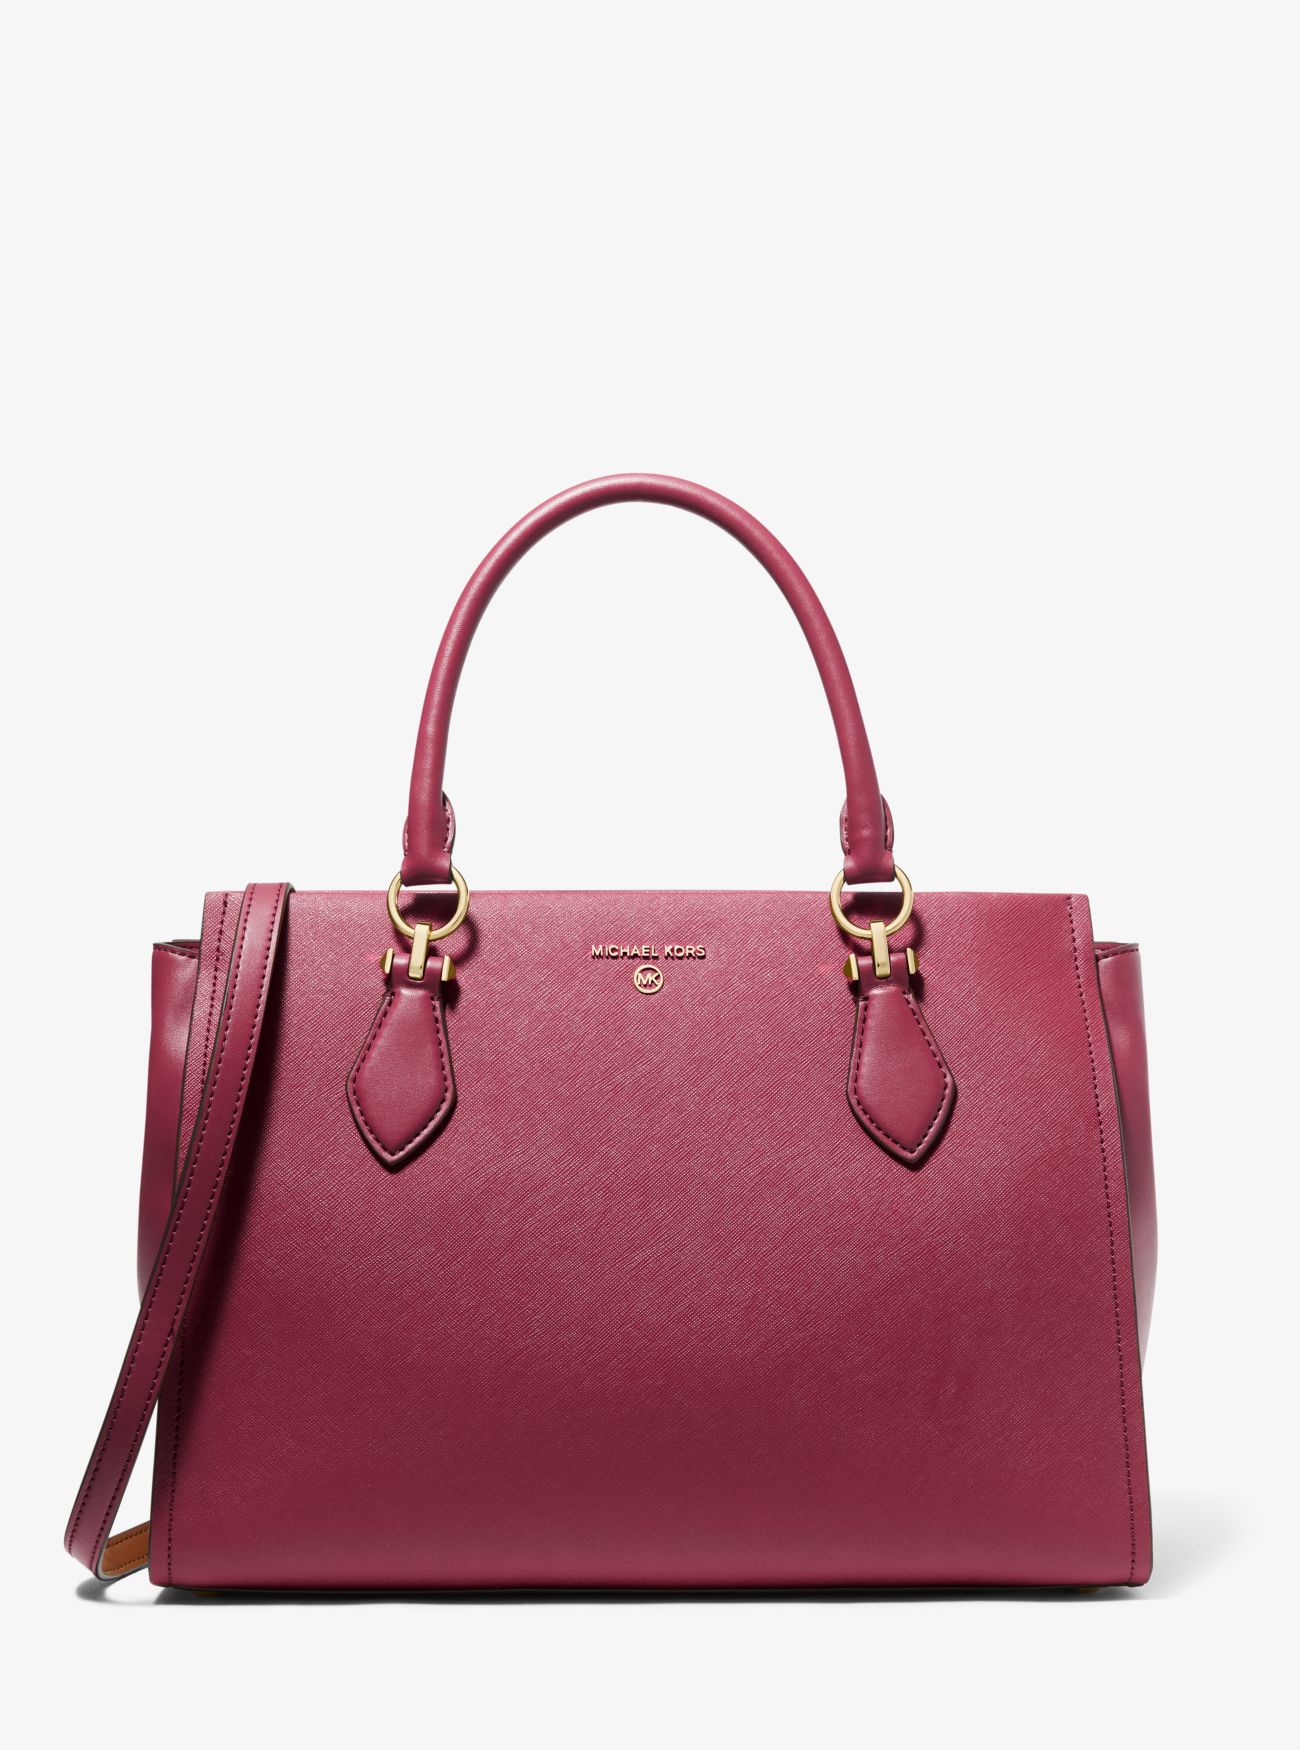 MK Marilyn Large Saffiano Leather Satchel - Mulberry - Michael Kors